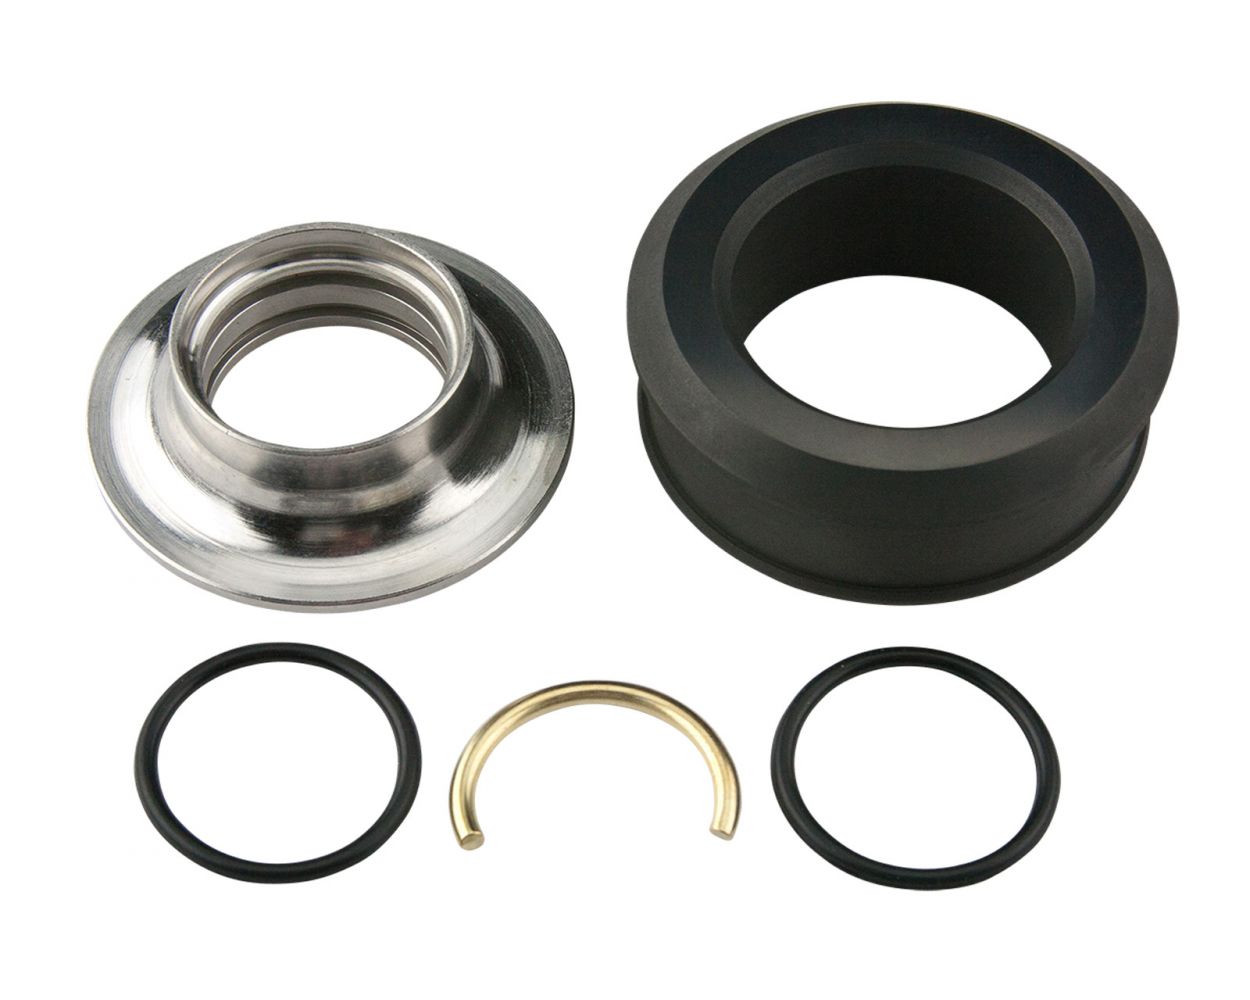 SCITOO 271001434 271001420 293300107 for Sea Doo Carbon Ring seal kit Fit For for Sea-Doo 2004-2006 RXP 2007 GTX LIMITED BVIC for Sea-Doo Drive line Rebuild Kit 2006 RXT 2006 GTX 4-TEC LIMITED 